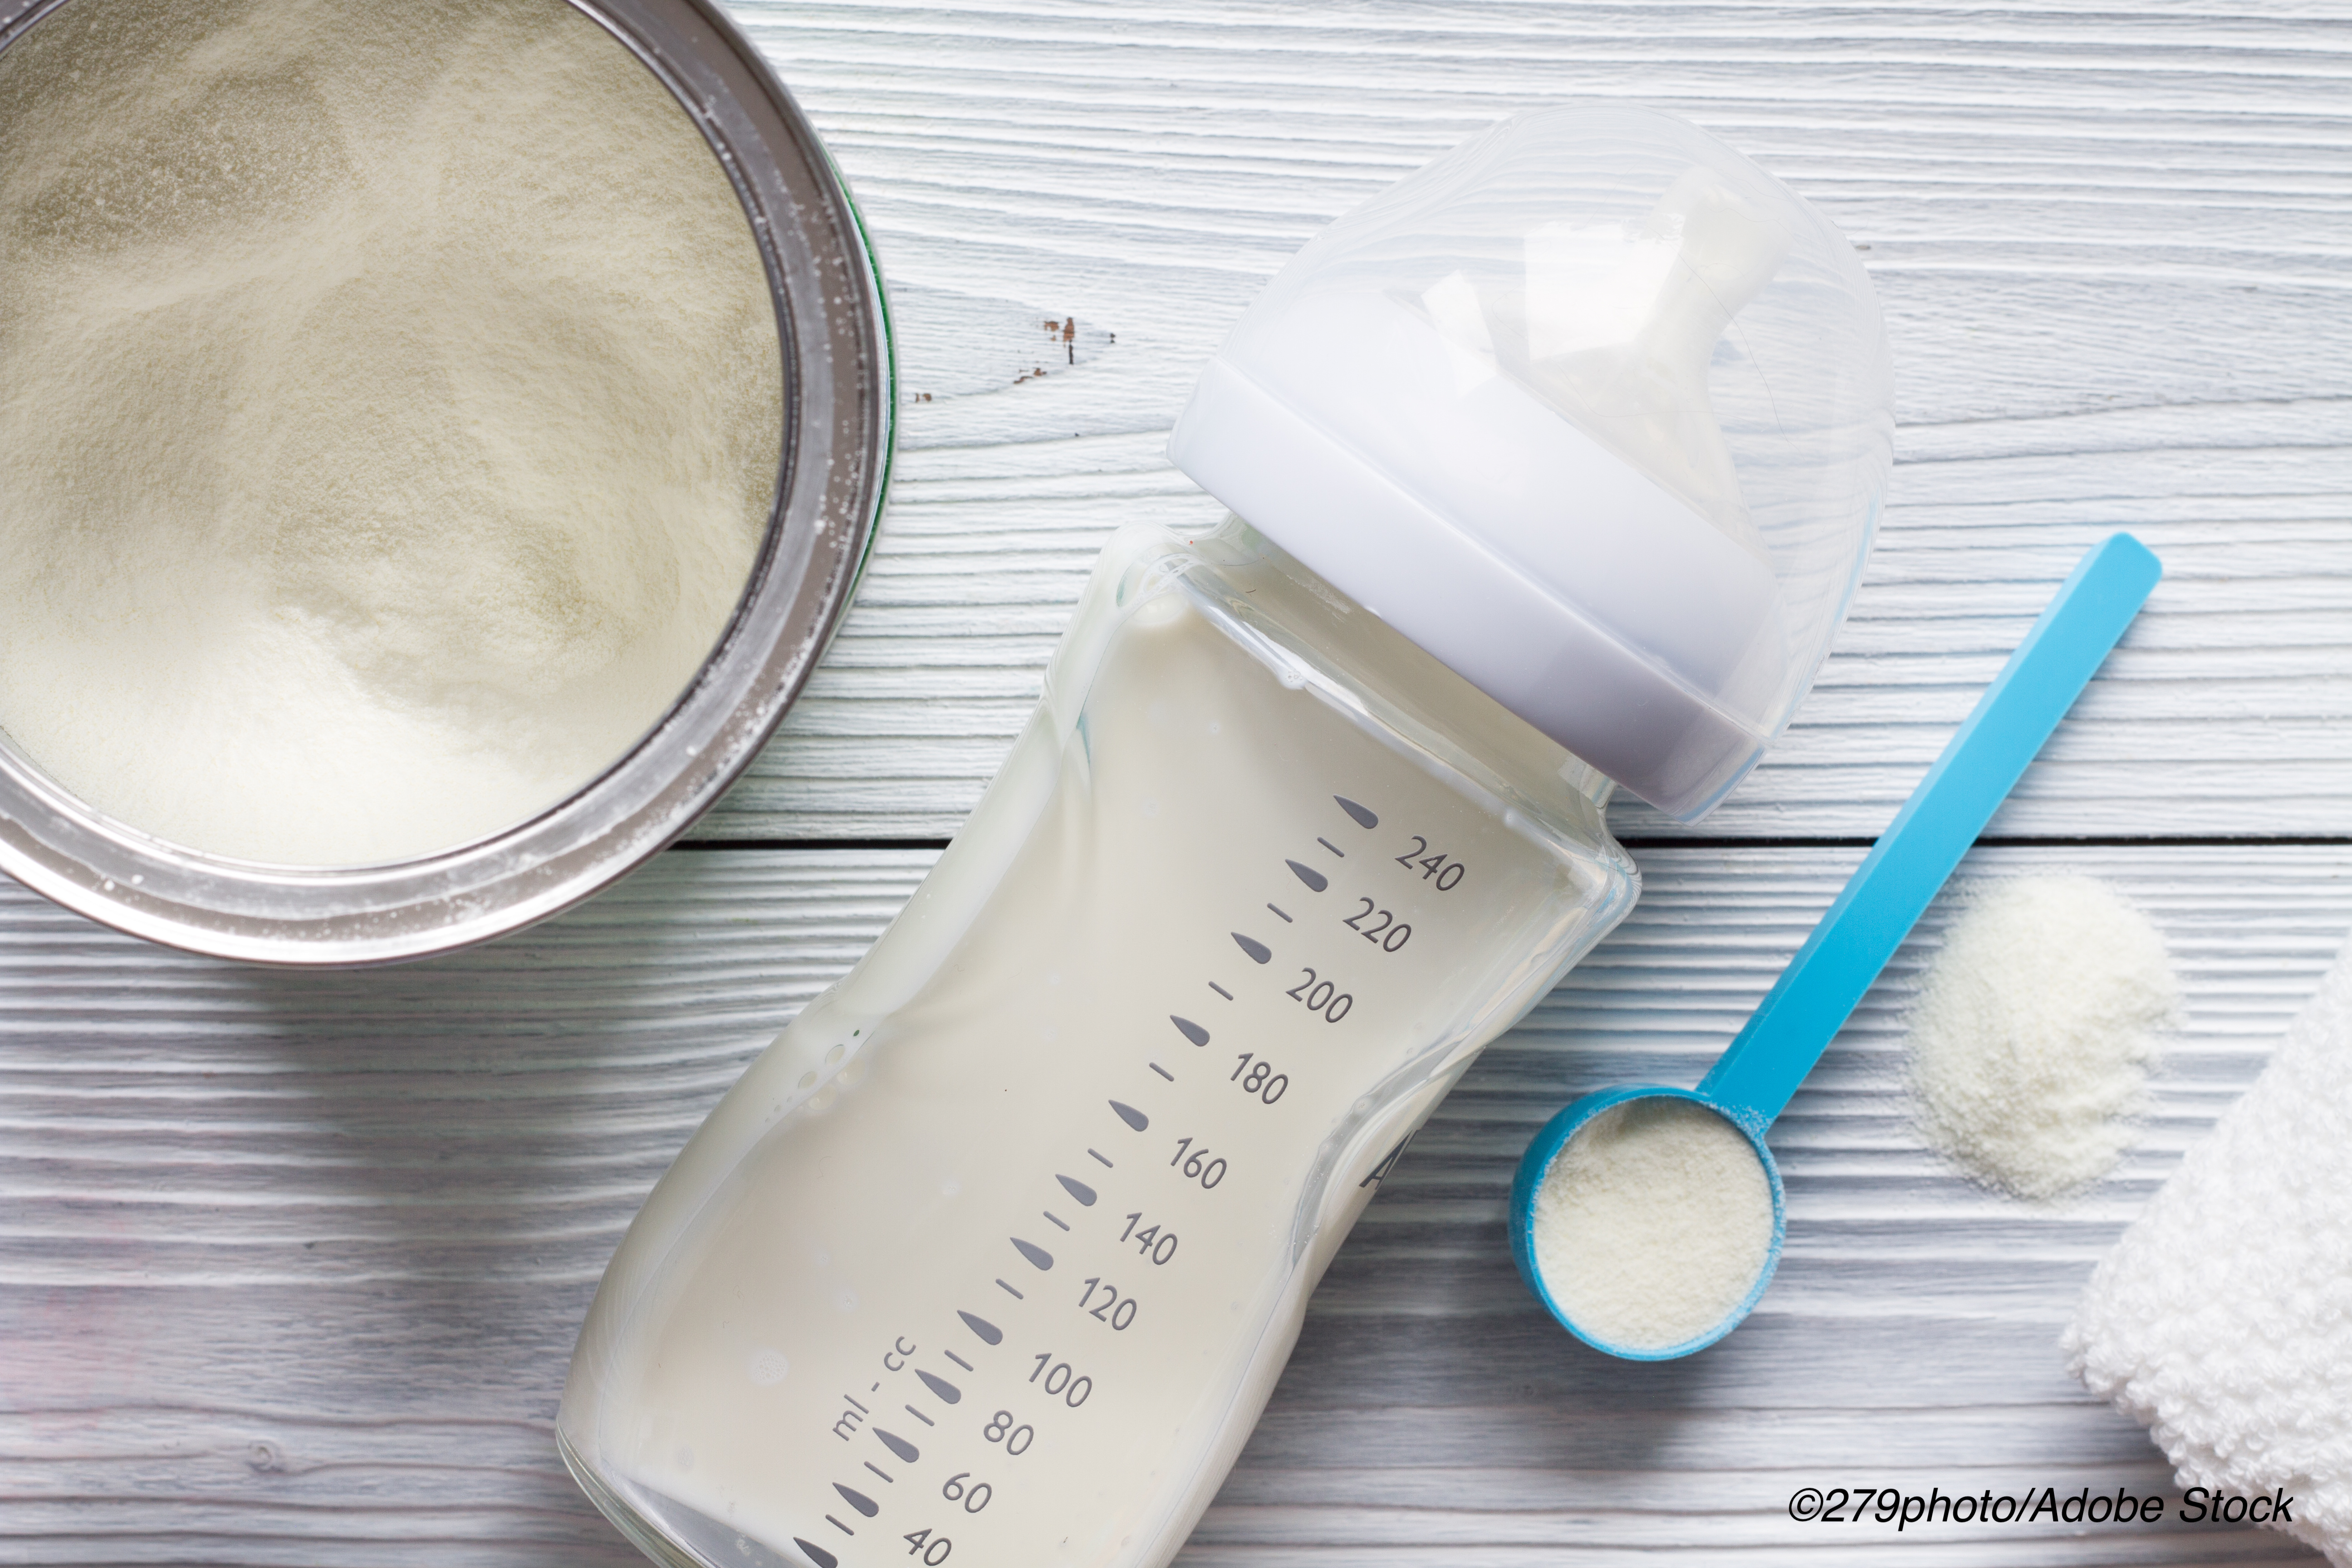 FDA Discourages Use of Homemade Baby Formula